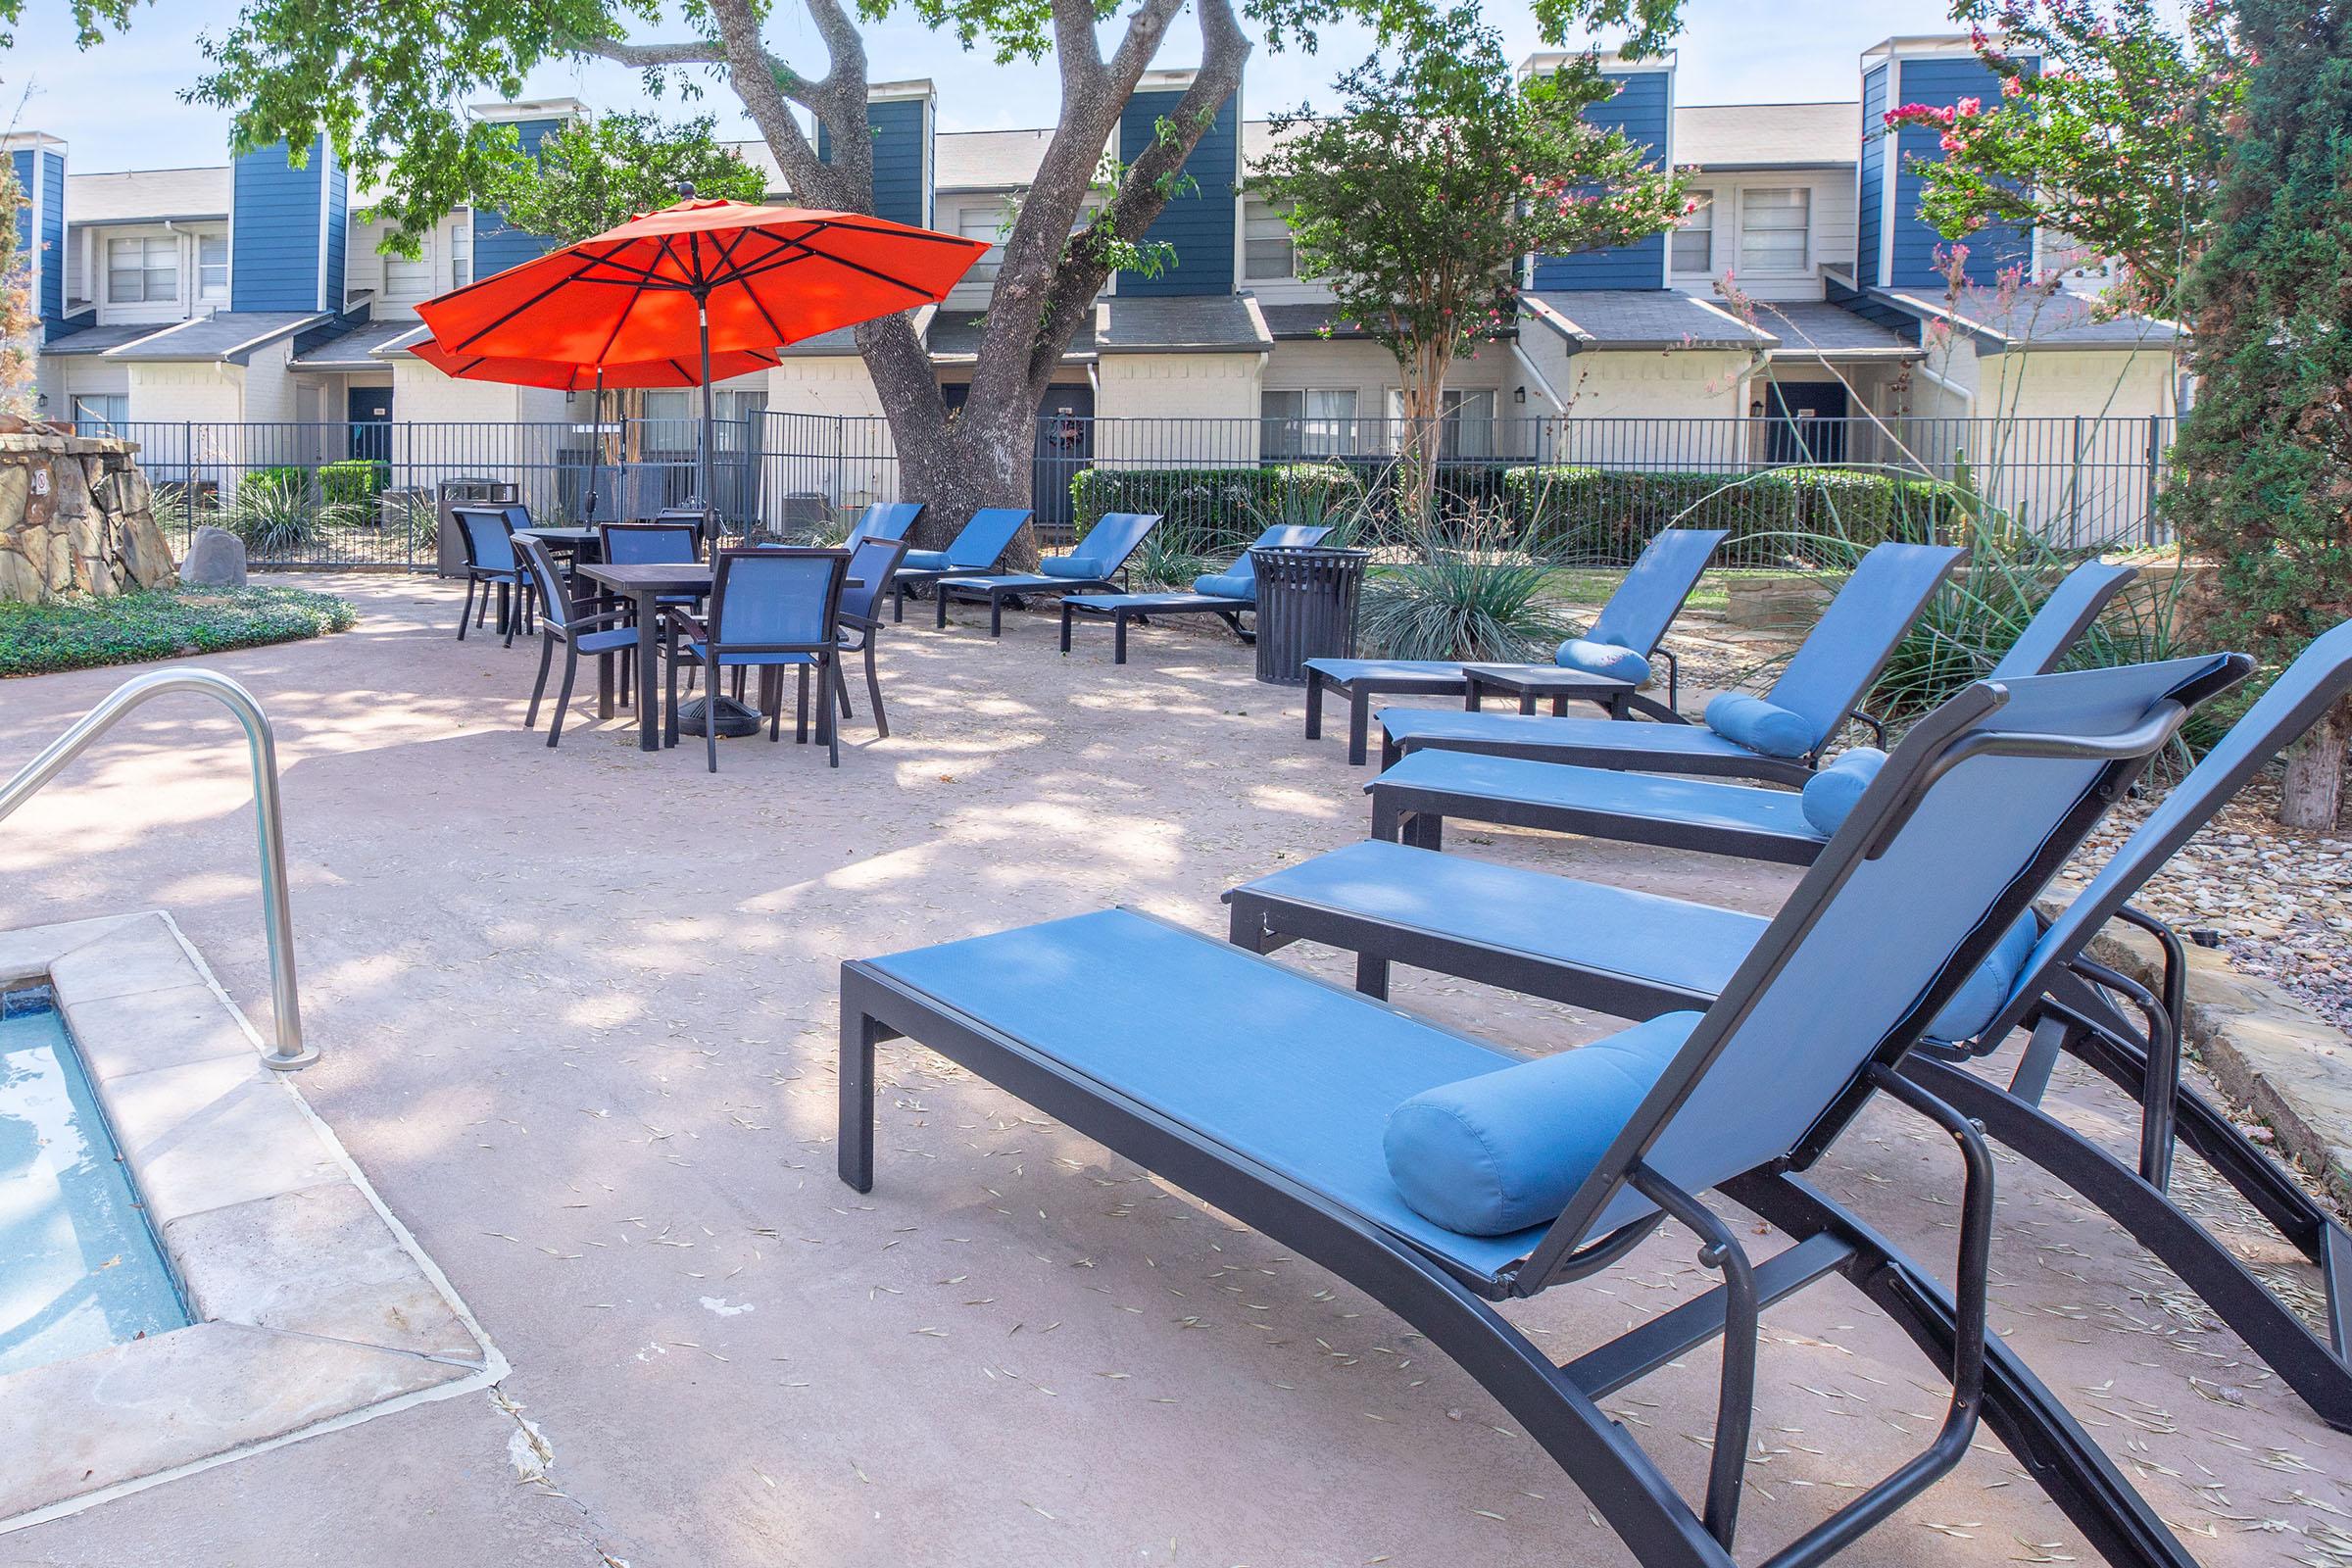 Many loungers and tables in the pool area at Rise North Arlington.